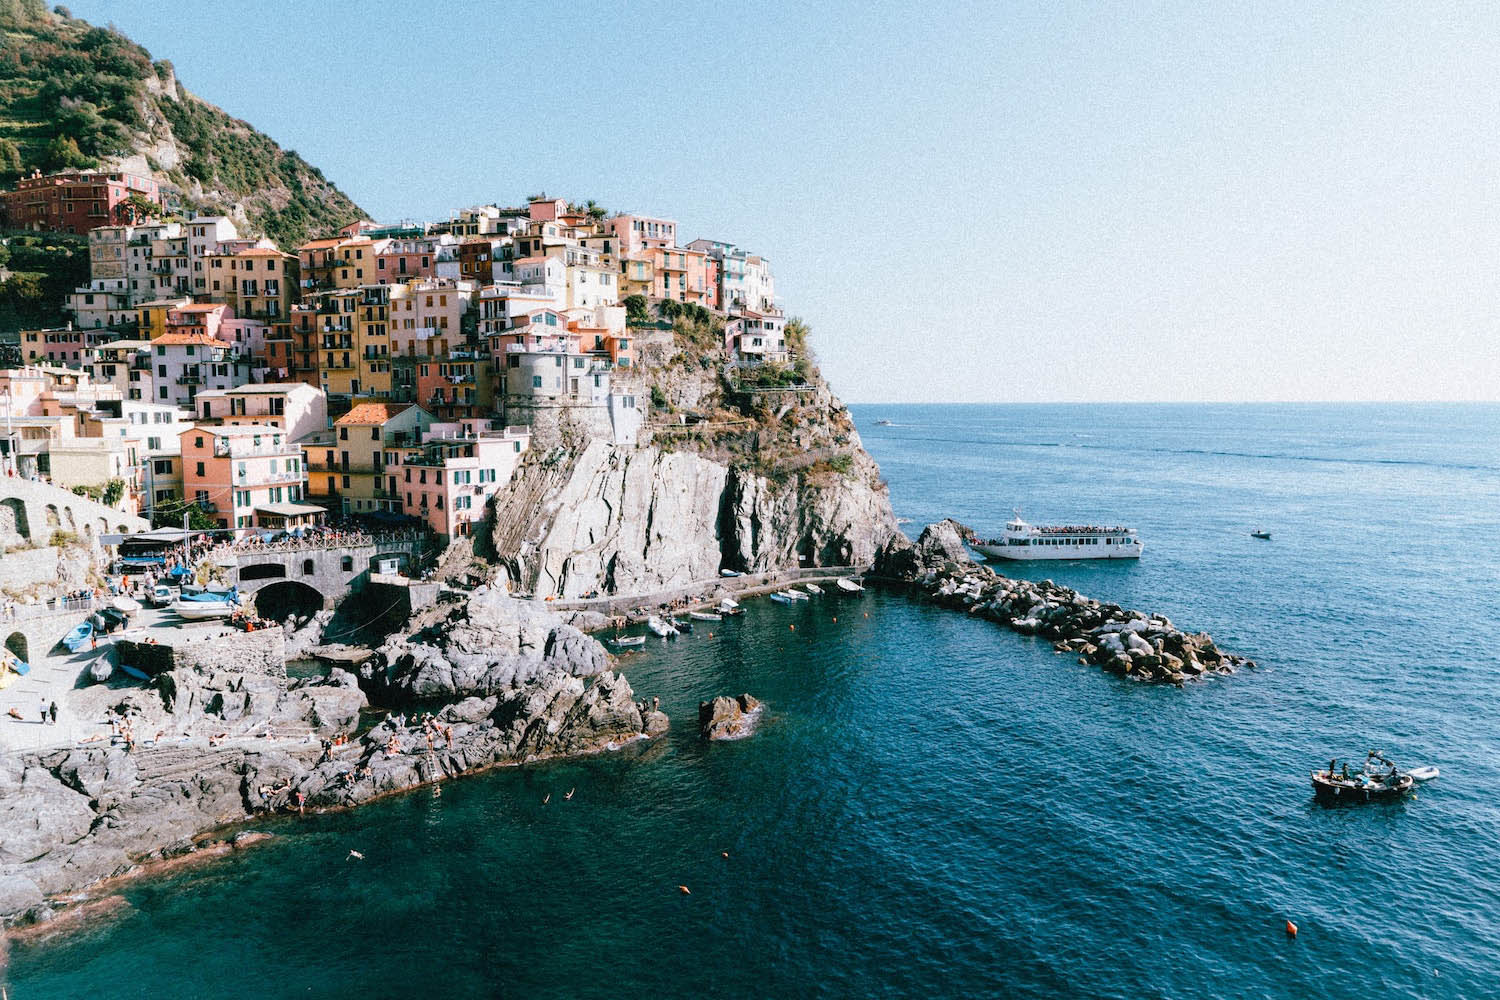 Colorful Houses of the village of Manarola, Italy, with natural rocks, the clear blue water and a boat in the background